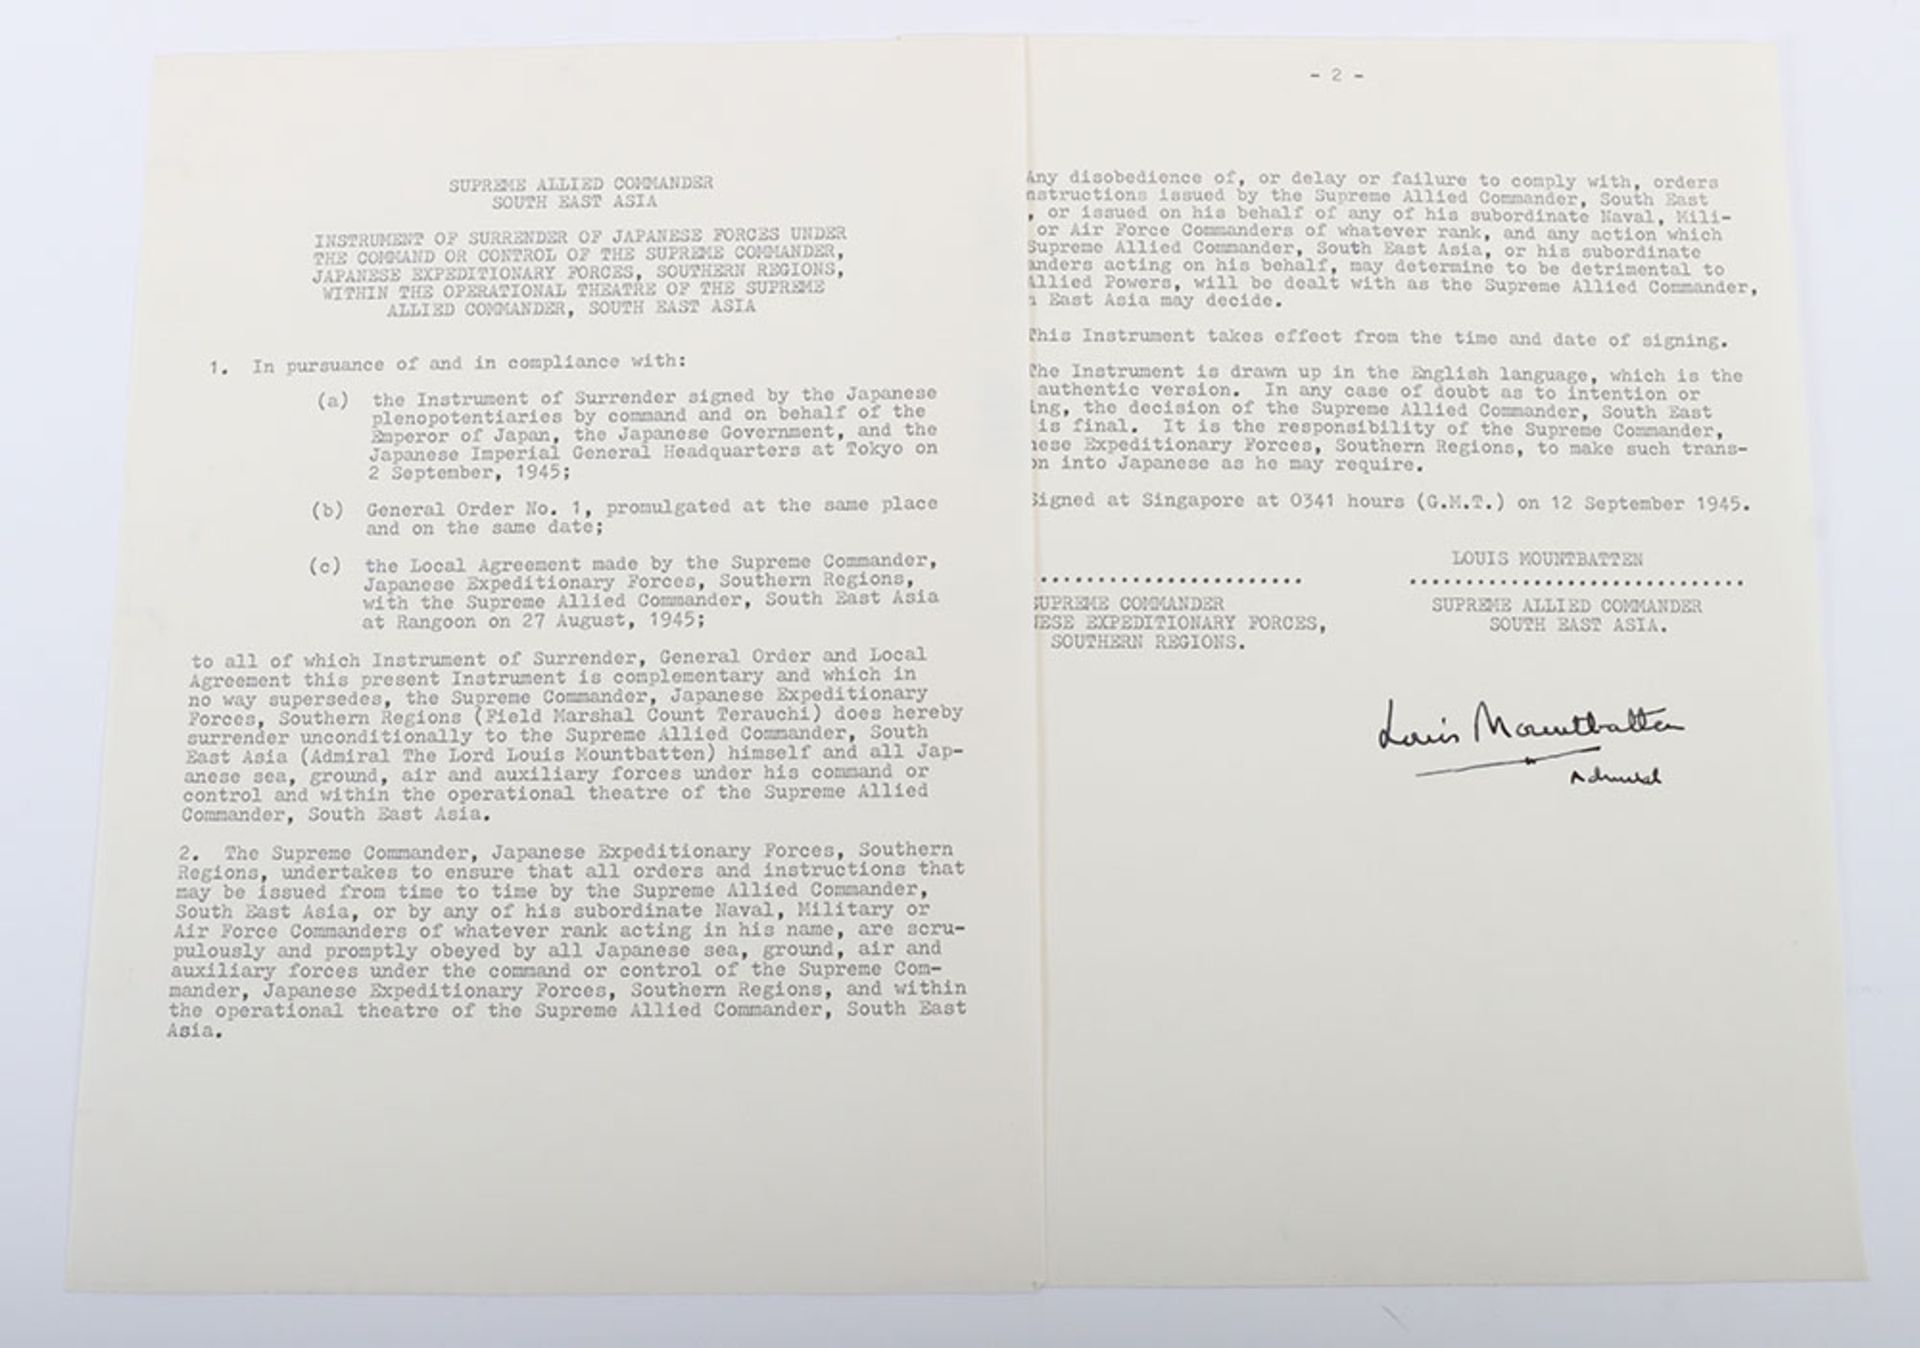 Louis Mountbatten, Lord. Signature - Image 3 of 5